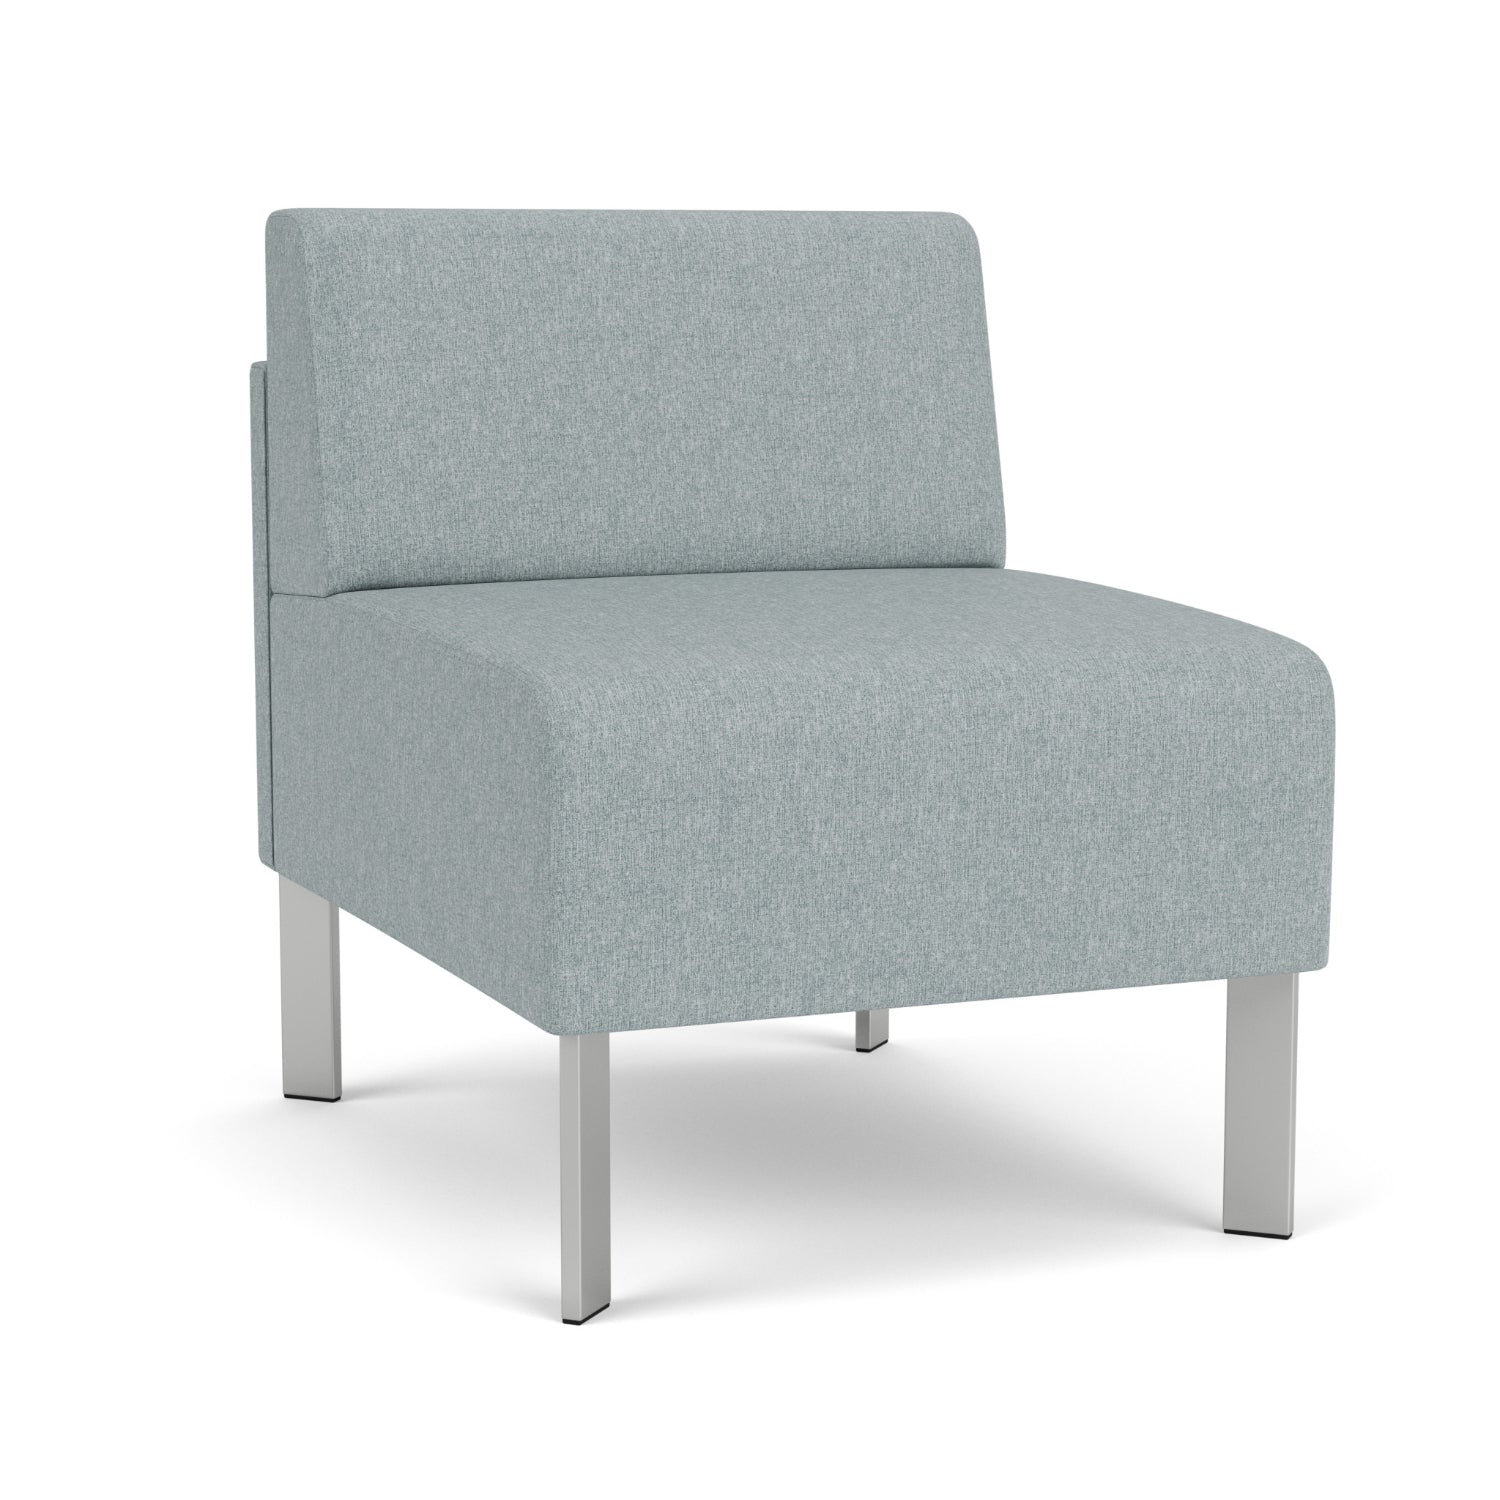 Luxe Collection Reception Seating, Armless Guest Chair, Healthcare Vinyl Upholstery, FREE SHIPPING